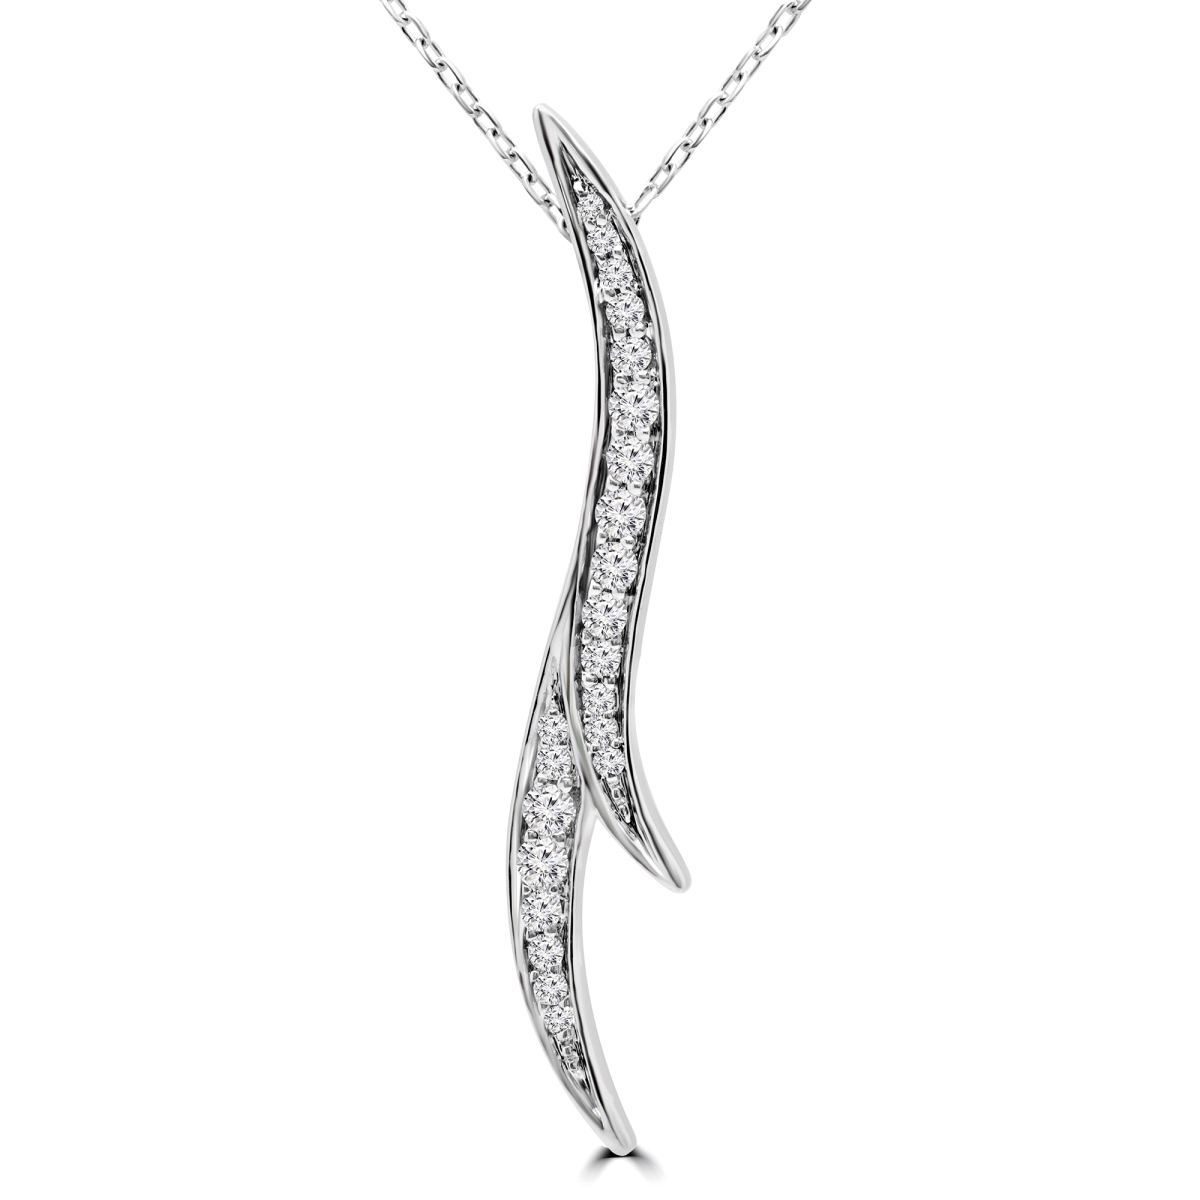 Mdr170167 0.2 Ctw Round Diamond Fancy Pendant Necklace In 14k